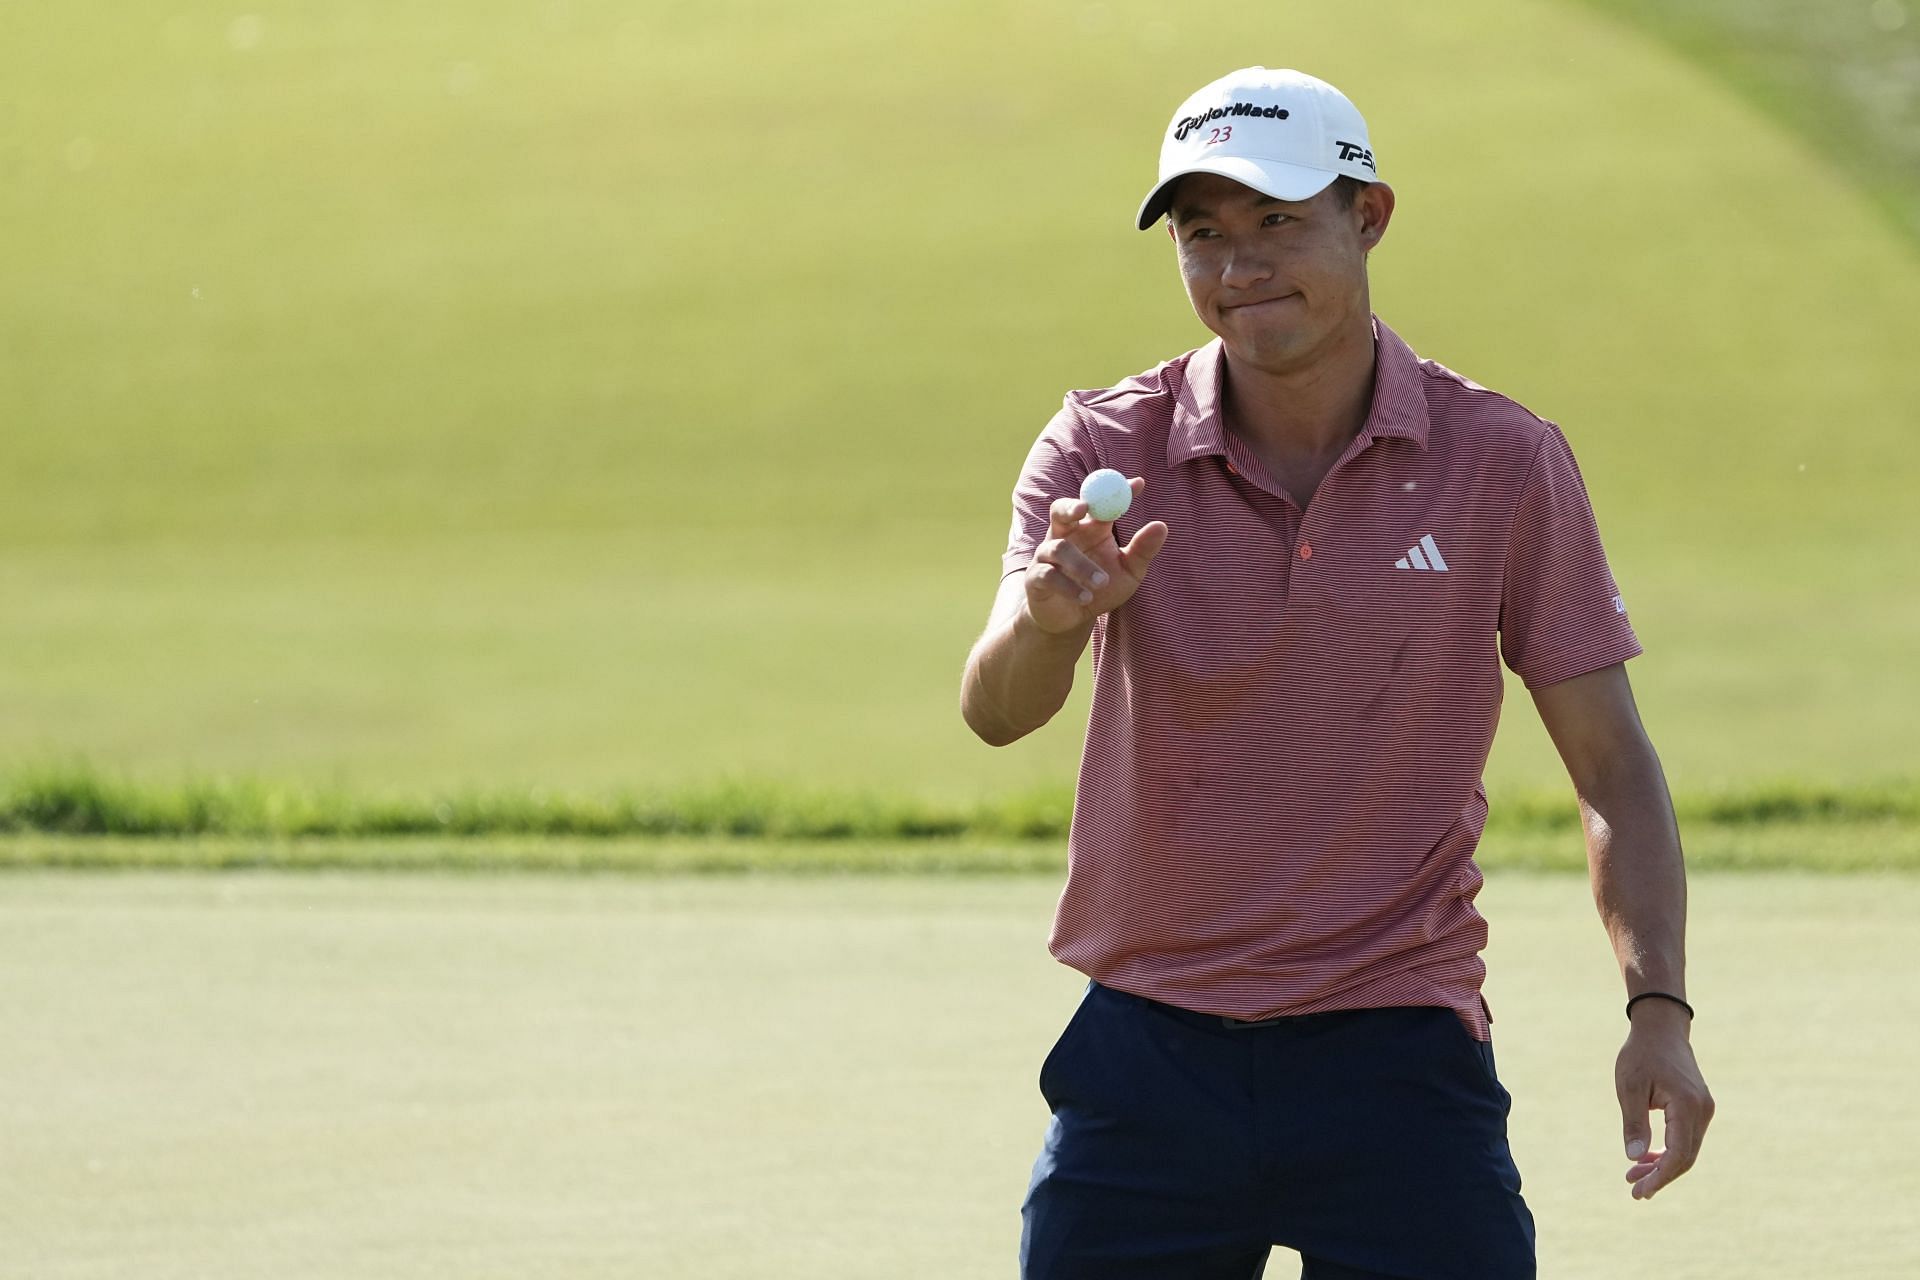 Collin Morikawa at the Memorial Tournament presented by Workday (Image via Getty).